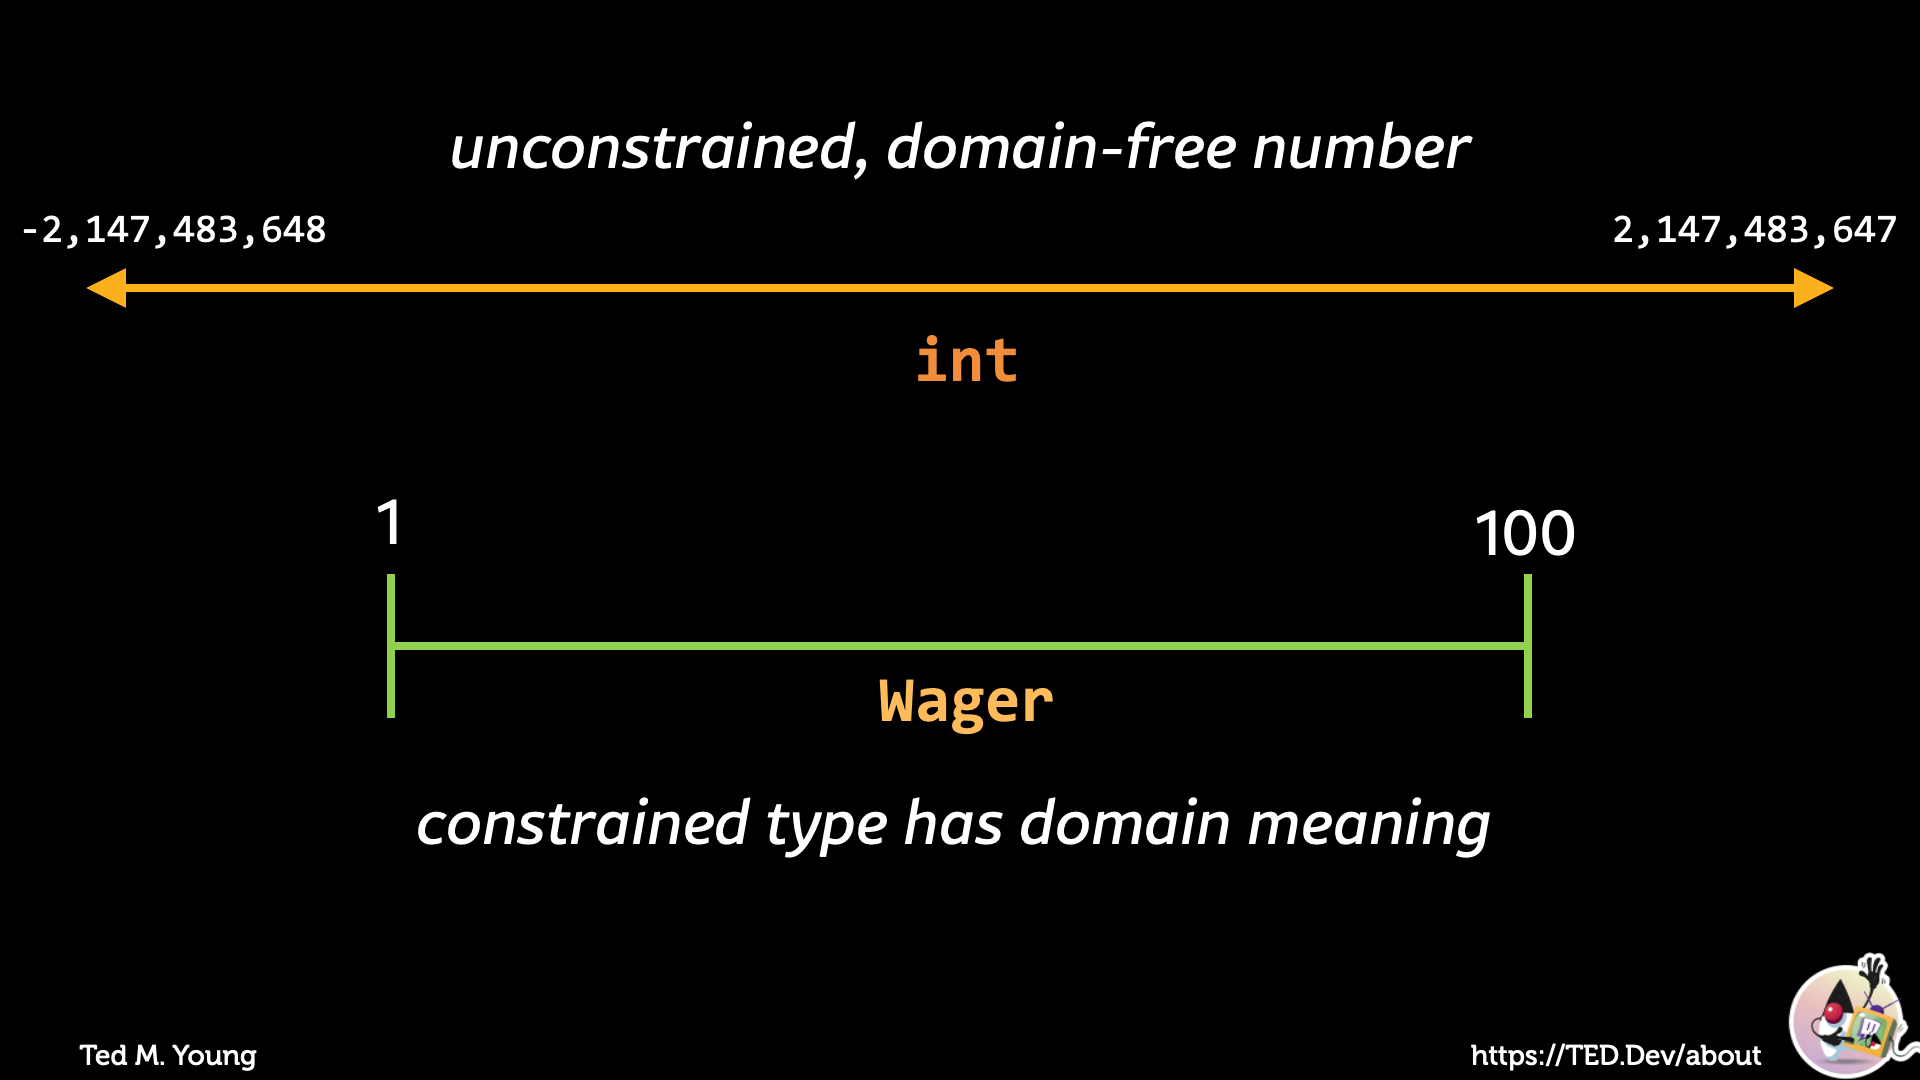 Slide from the presentation that shows a domain-free integer vs. a domain-specific Wager